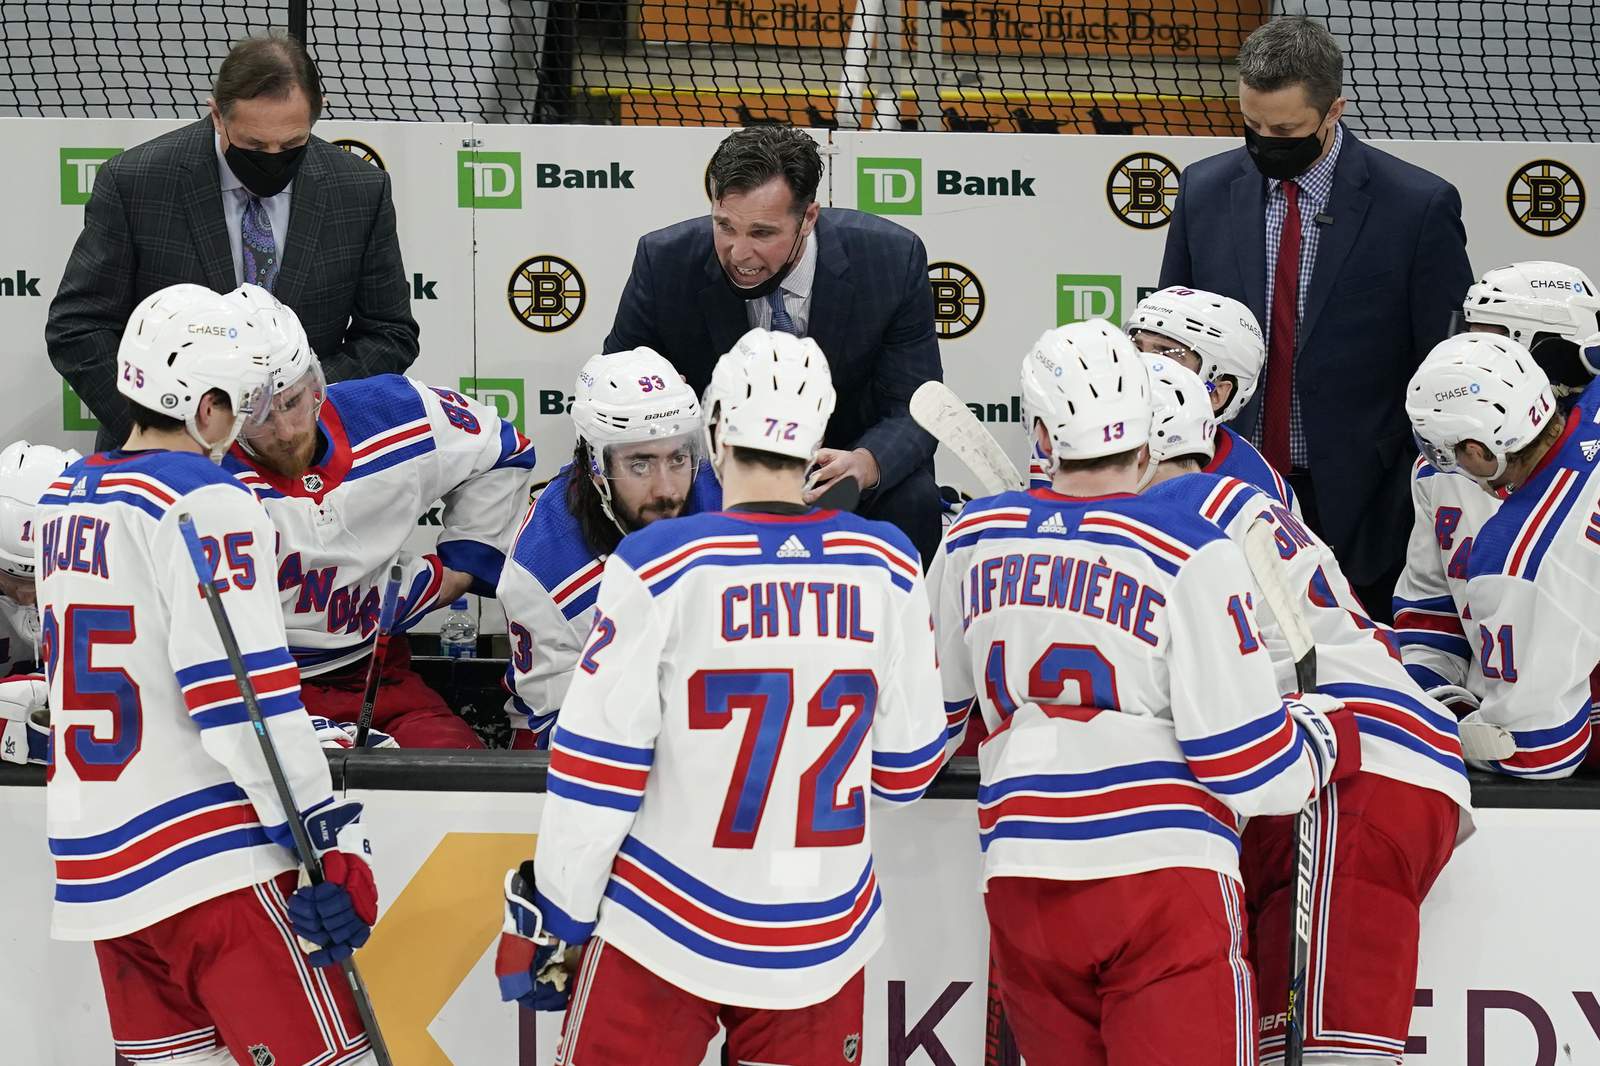 The Latest: Coaching staff of NY Rangers in COVID protocol